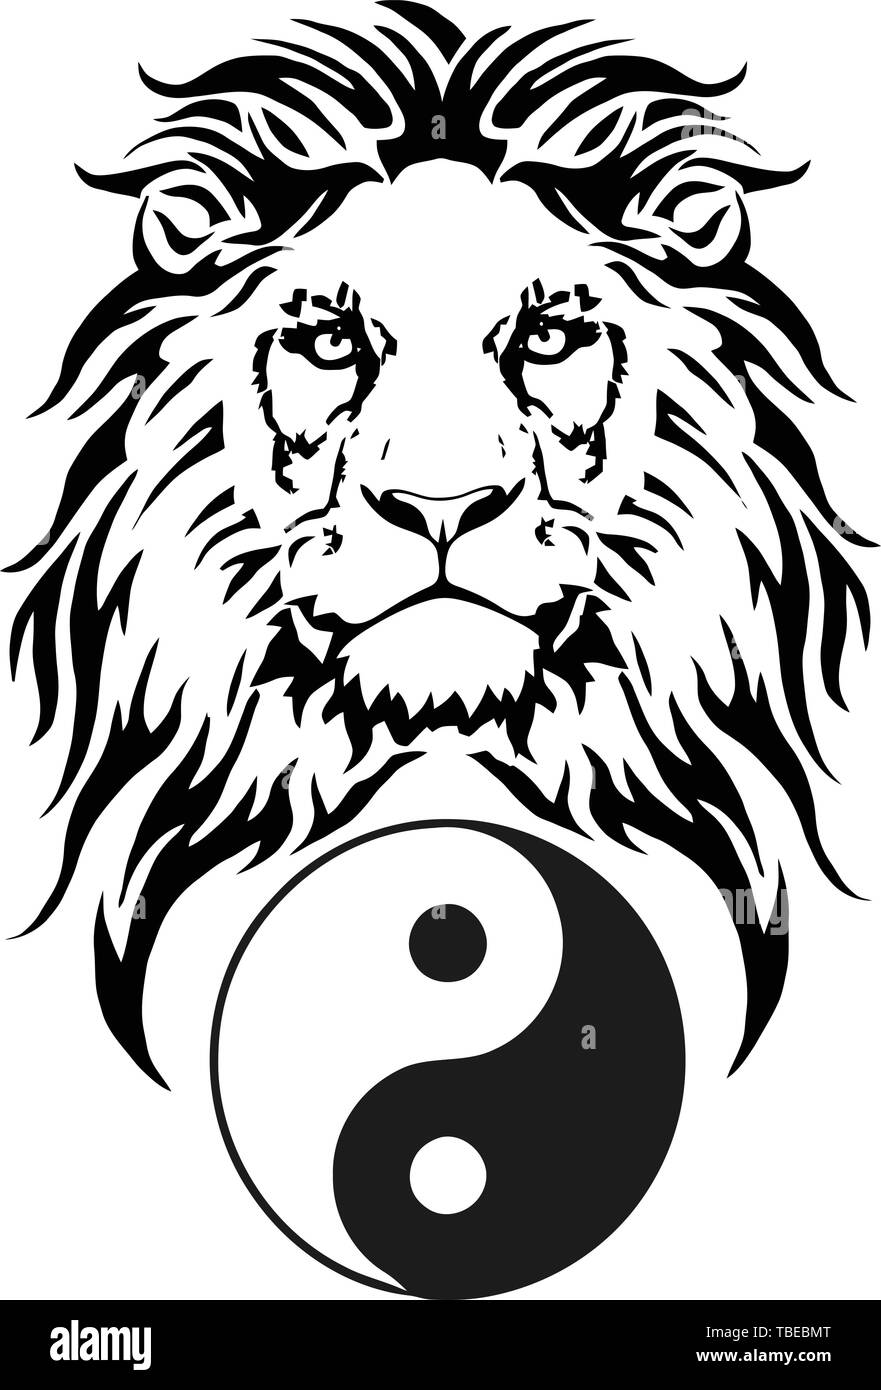 The Lion and the symbol of Dao - Yin and Yang, drawing for tattoo, on a white background, vector Stock Vector